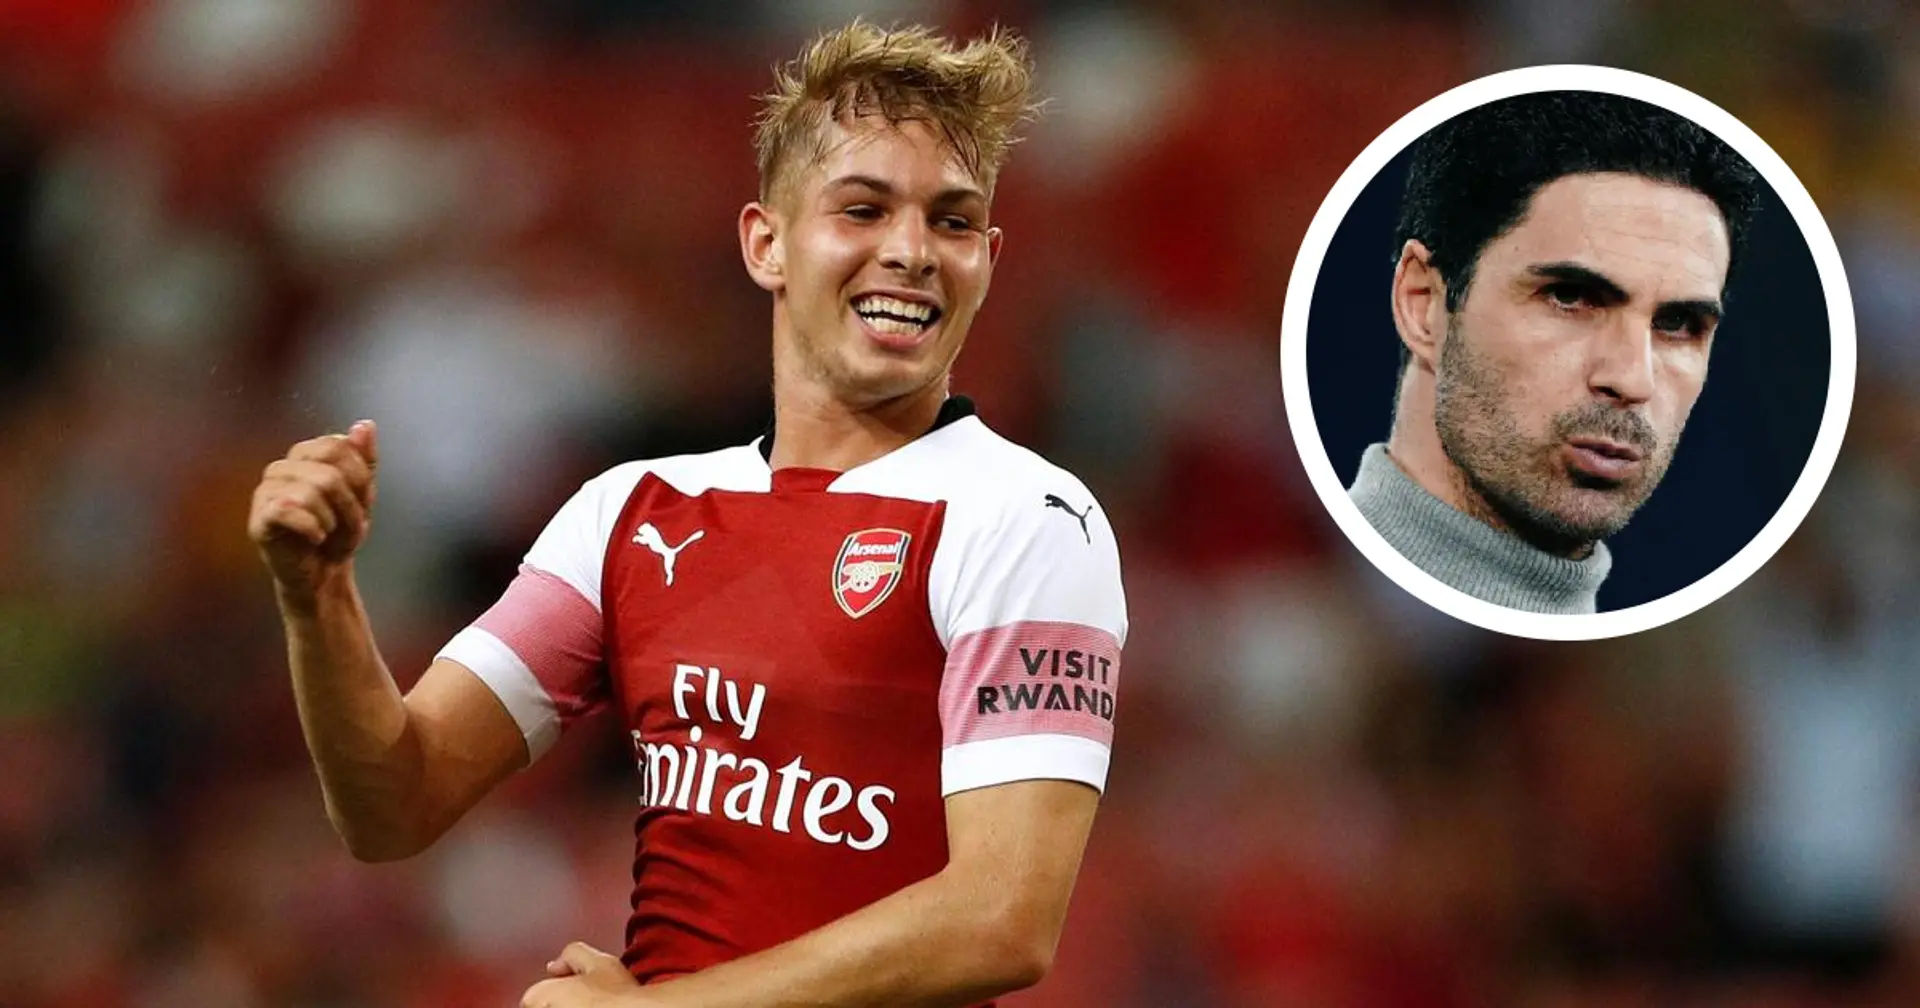 'That makes a huge difference': Mikel Arteta reveals one trait of Emile Smith Rowe's he really admires